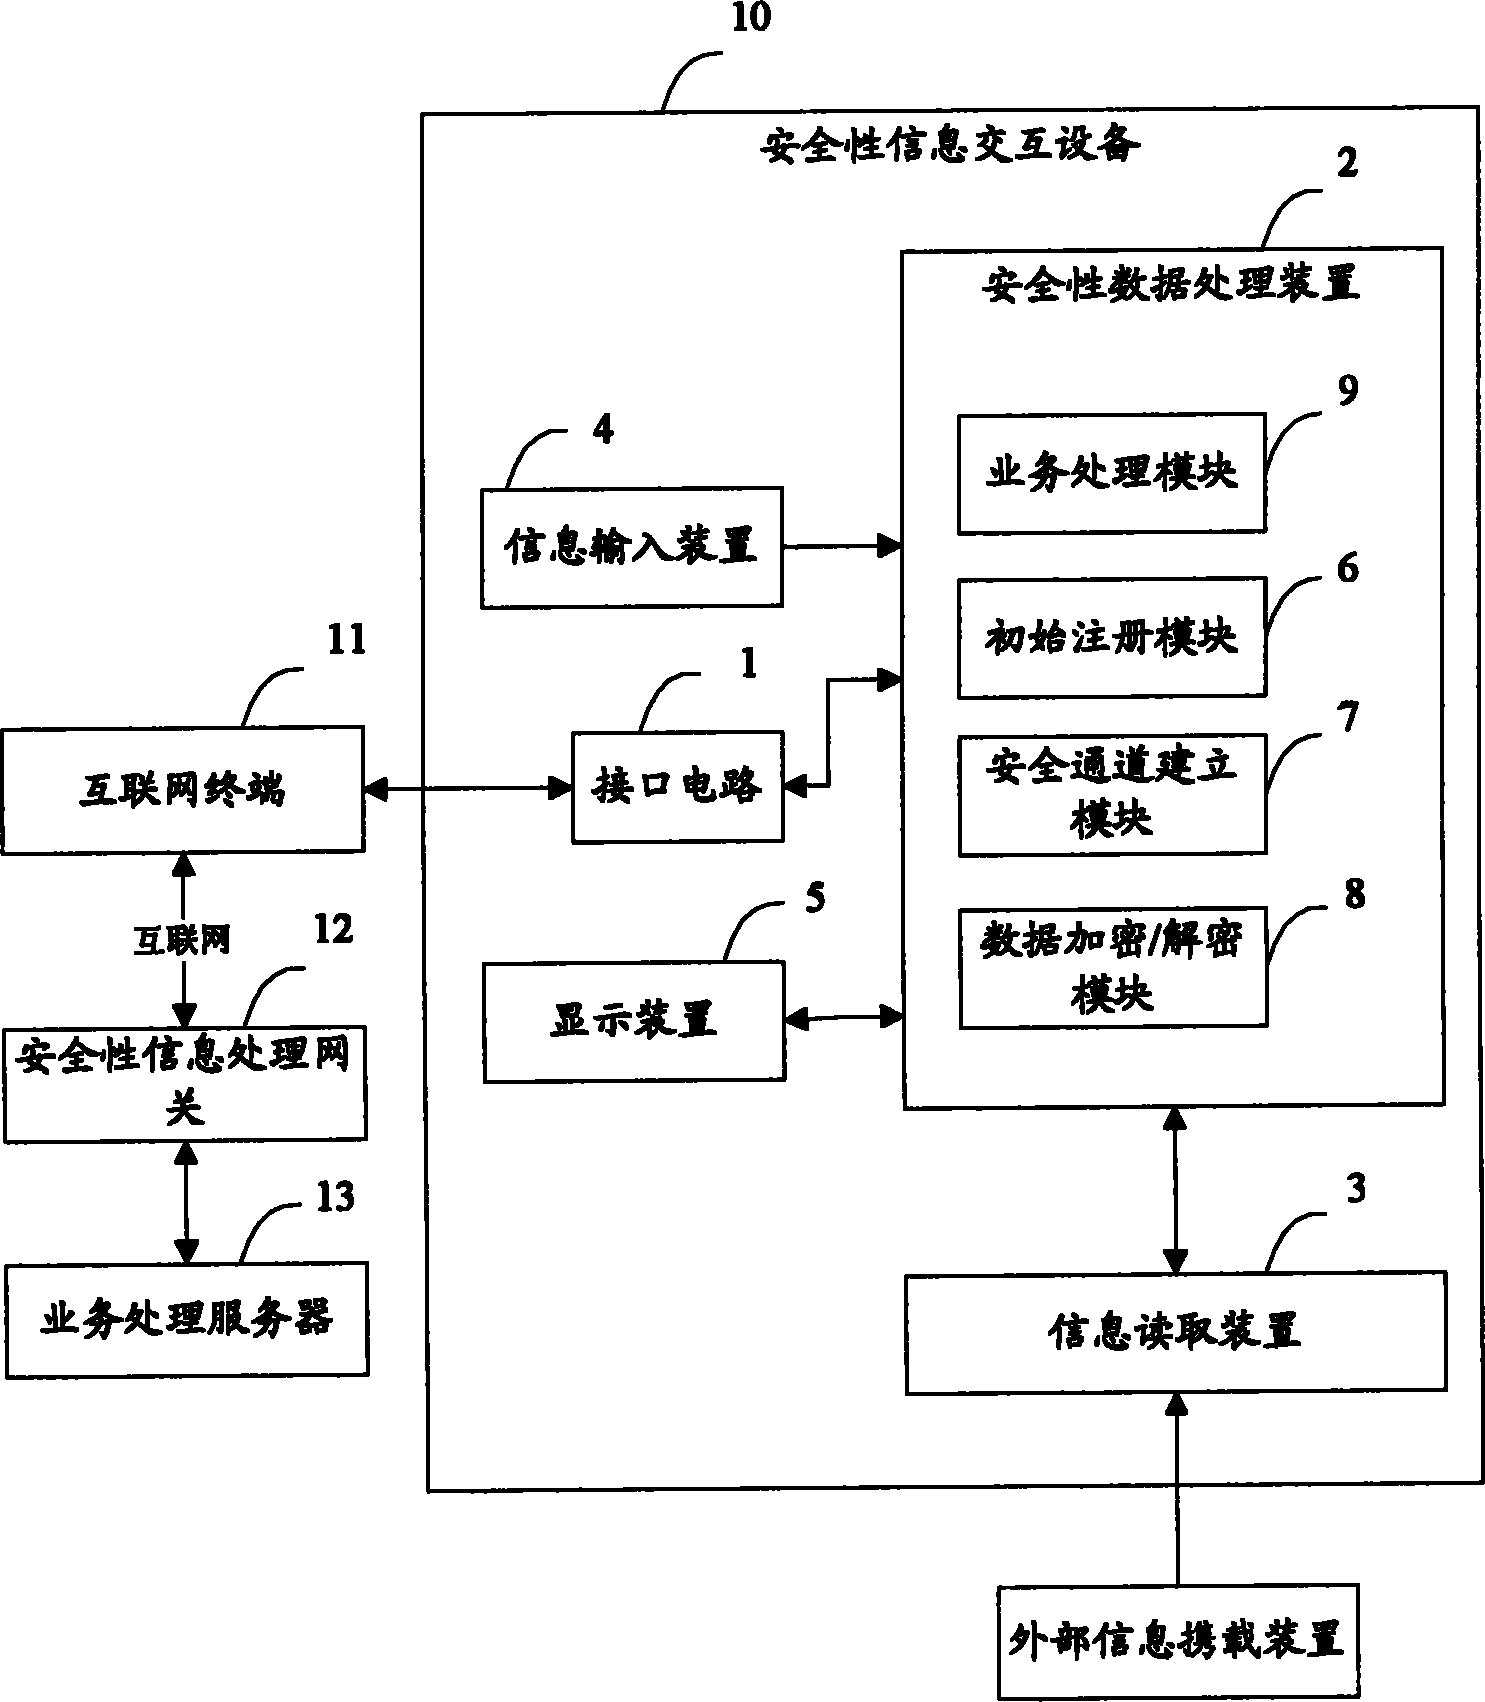 Internet-based system and method for security information interaction